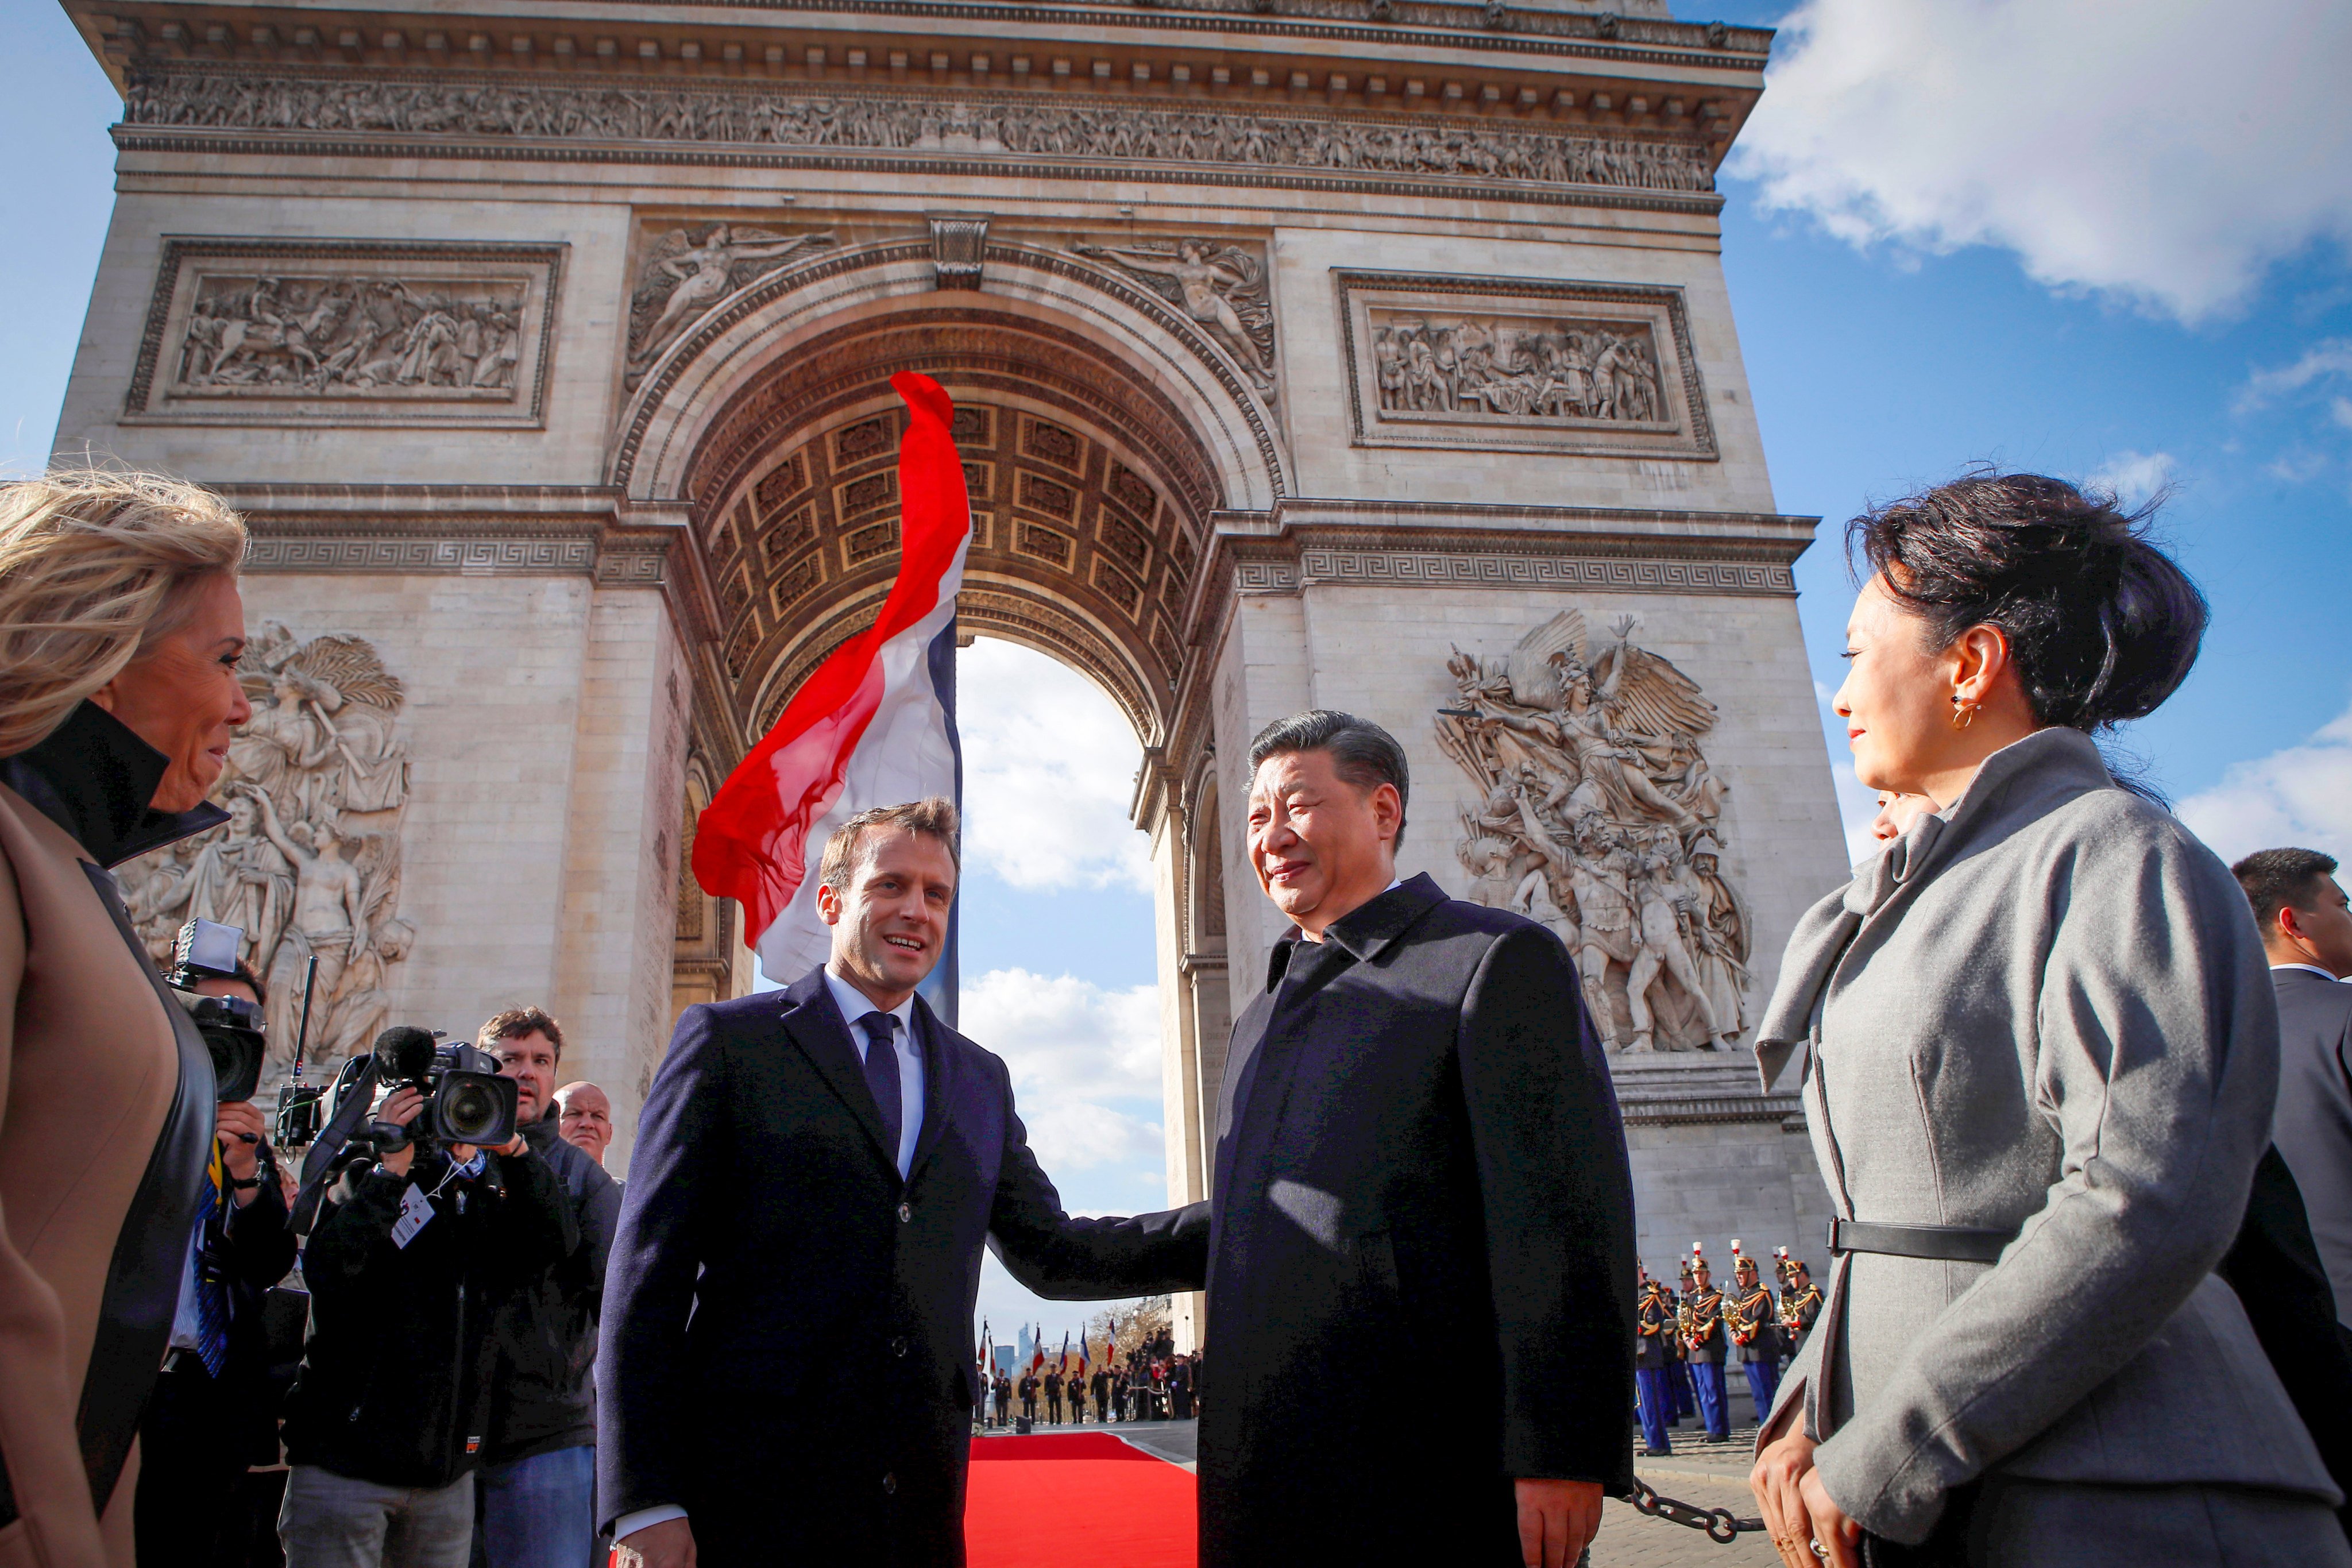 Presidents Emmanuel Macron and Xi Jinping pictured with their wives Brigitte Macron and Peng Liyuan at the Arc de Triomphe in Paris during the Chinese leader’s 2019 visit. Photo: Reuters